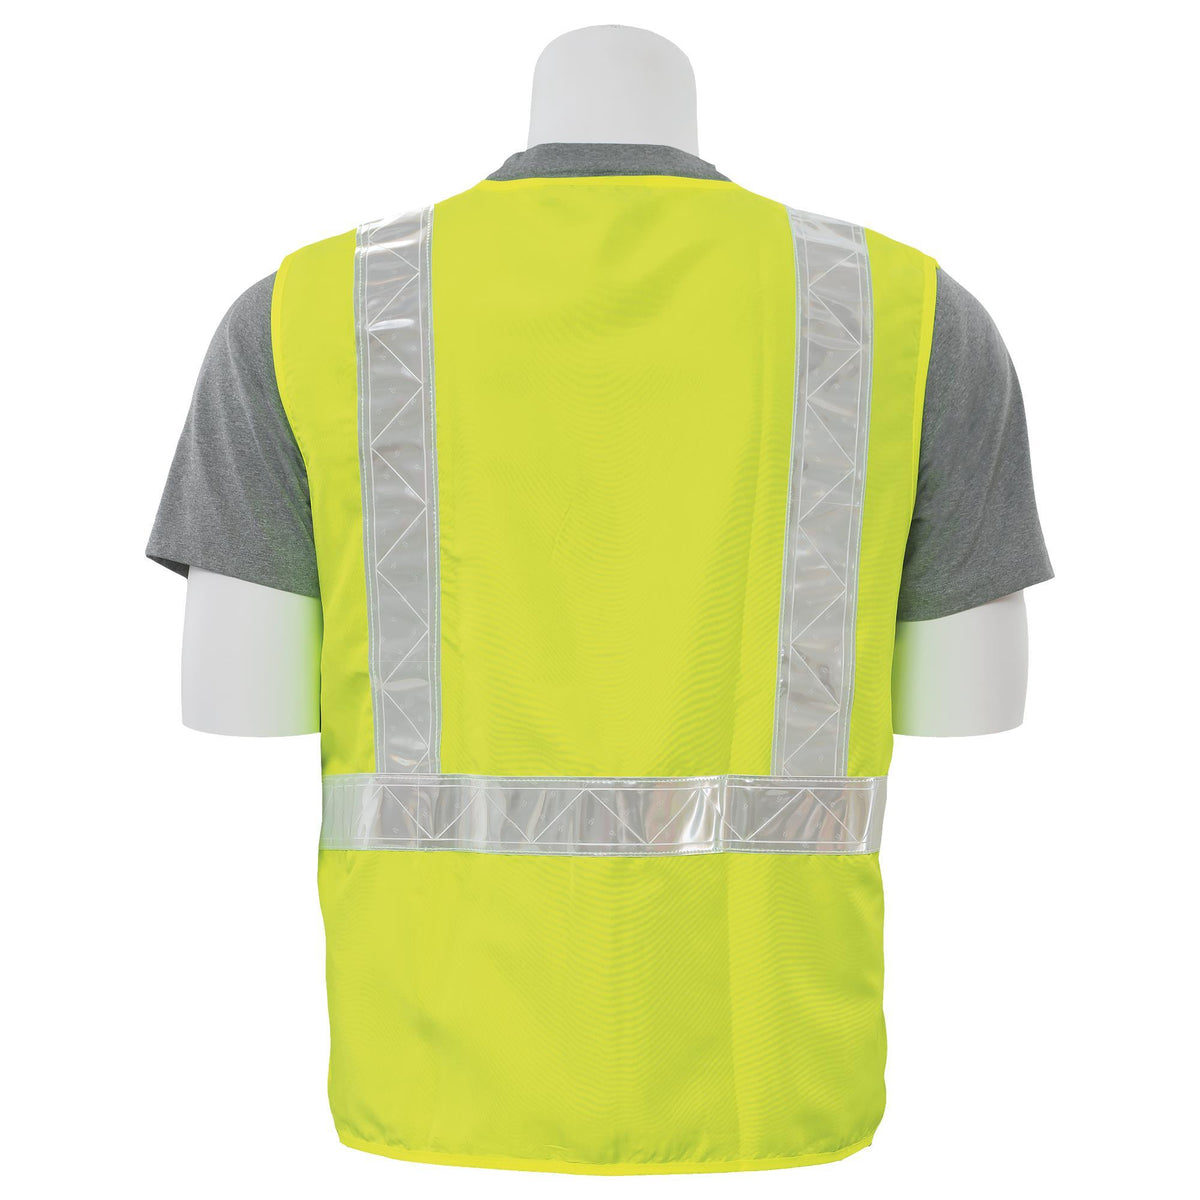 S17 Class 2 Safety Vest with 3M® High-Gloss Trim 1PC